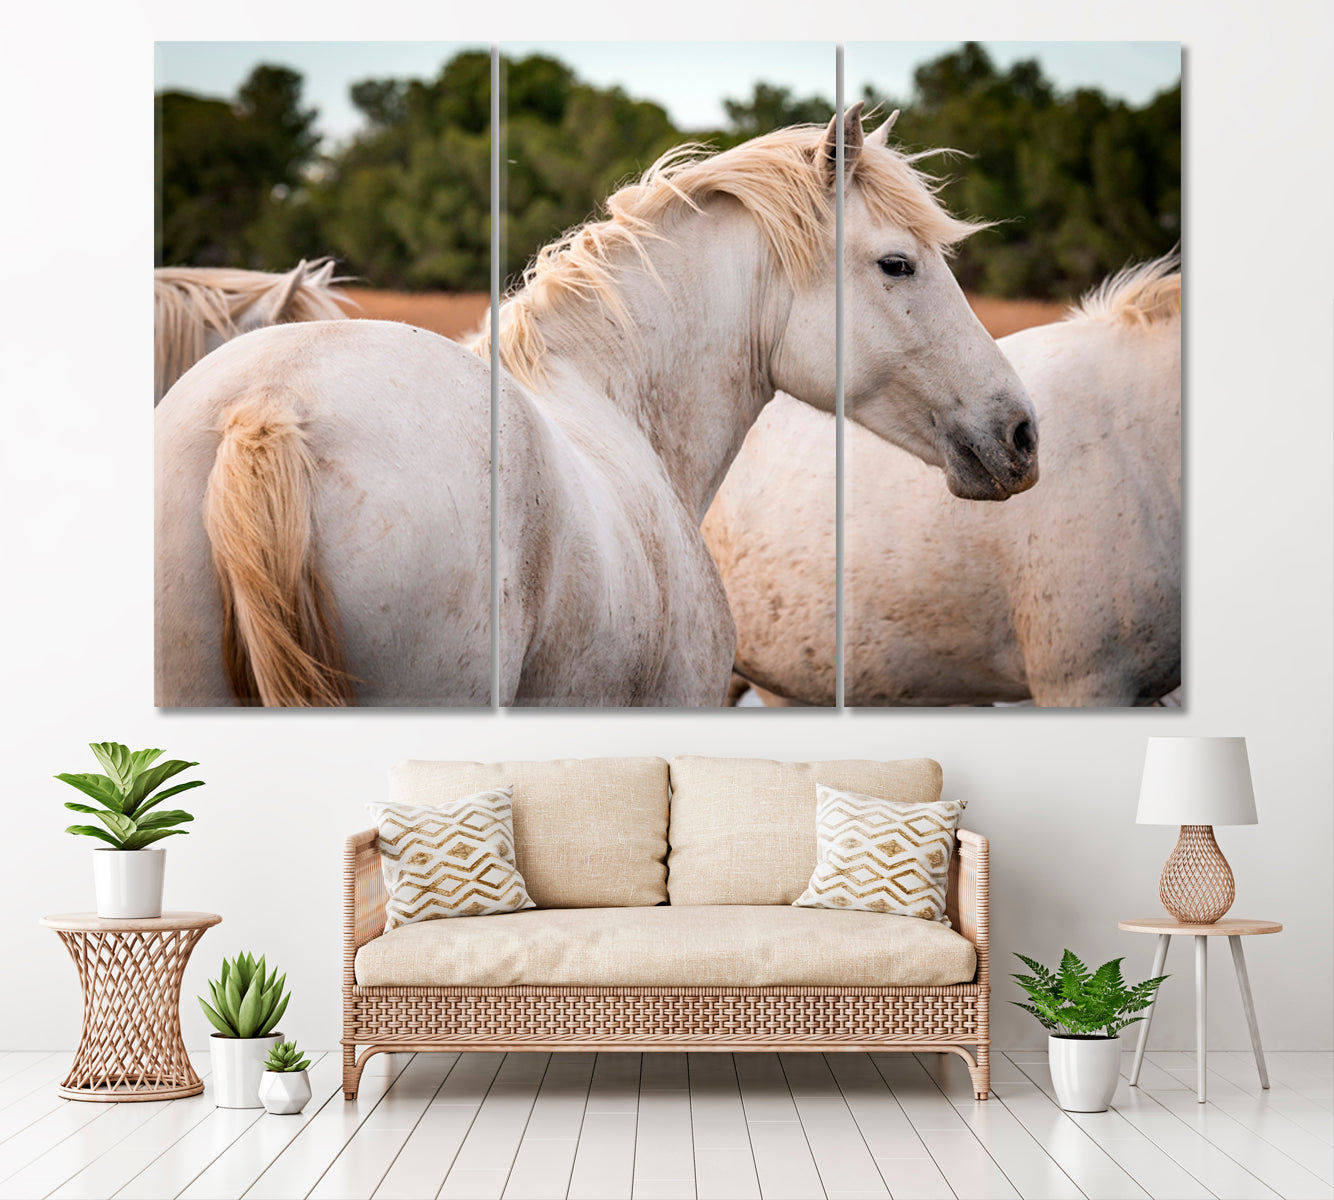 Herd of White Horses Camargue France Canvas Print ArtLexy 3 Panels 36"x24" inches 